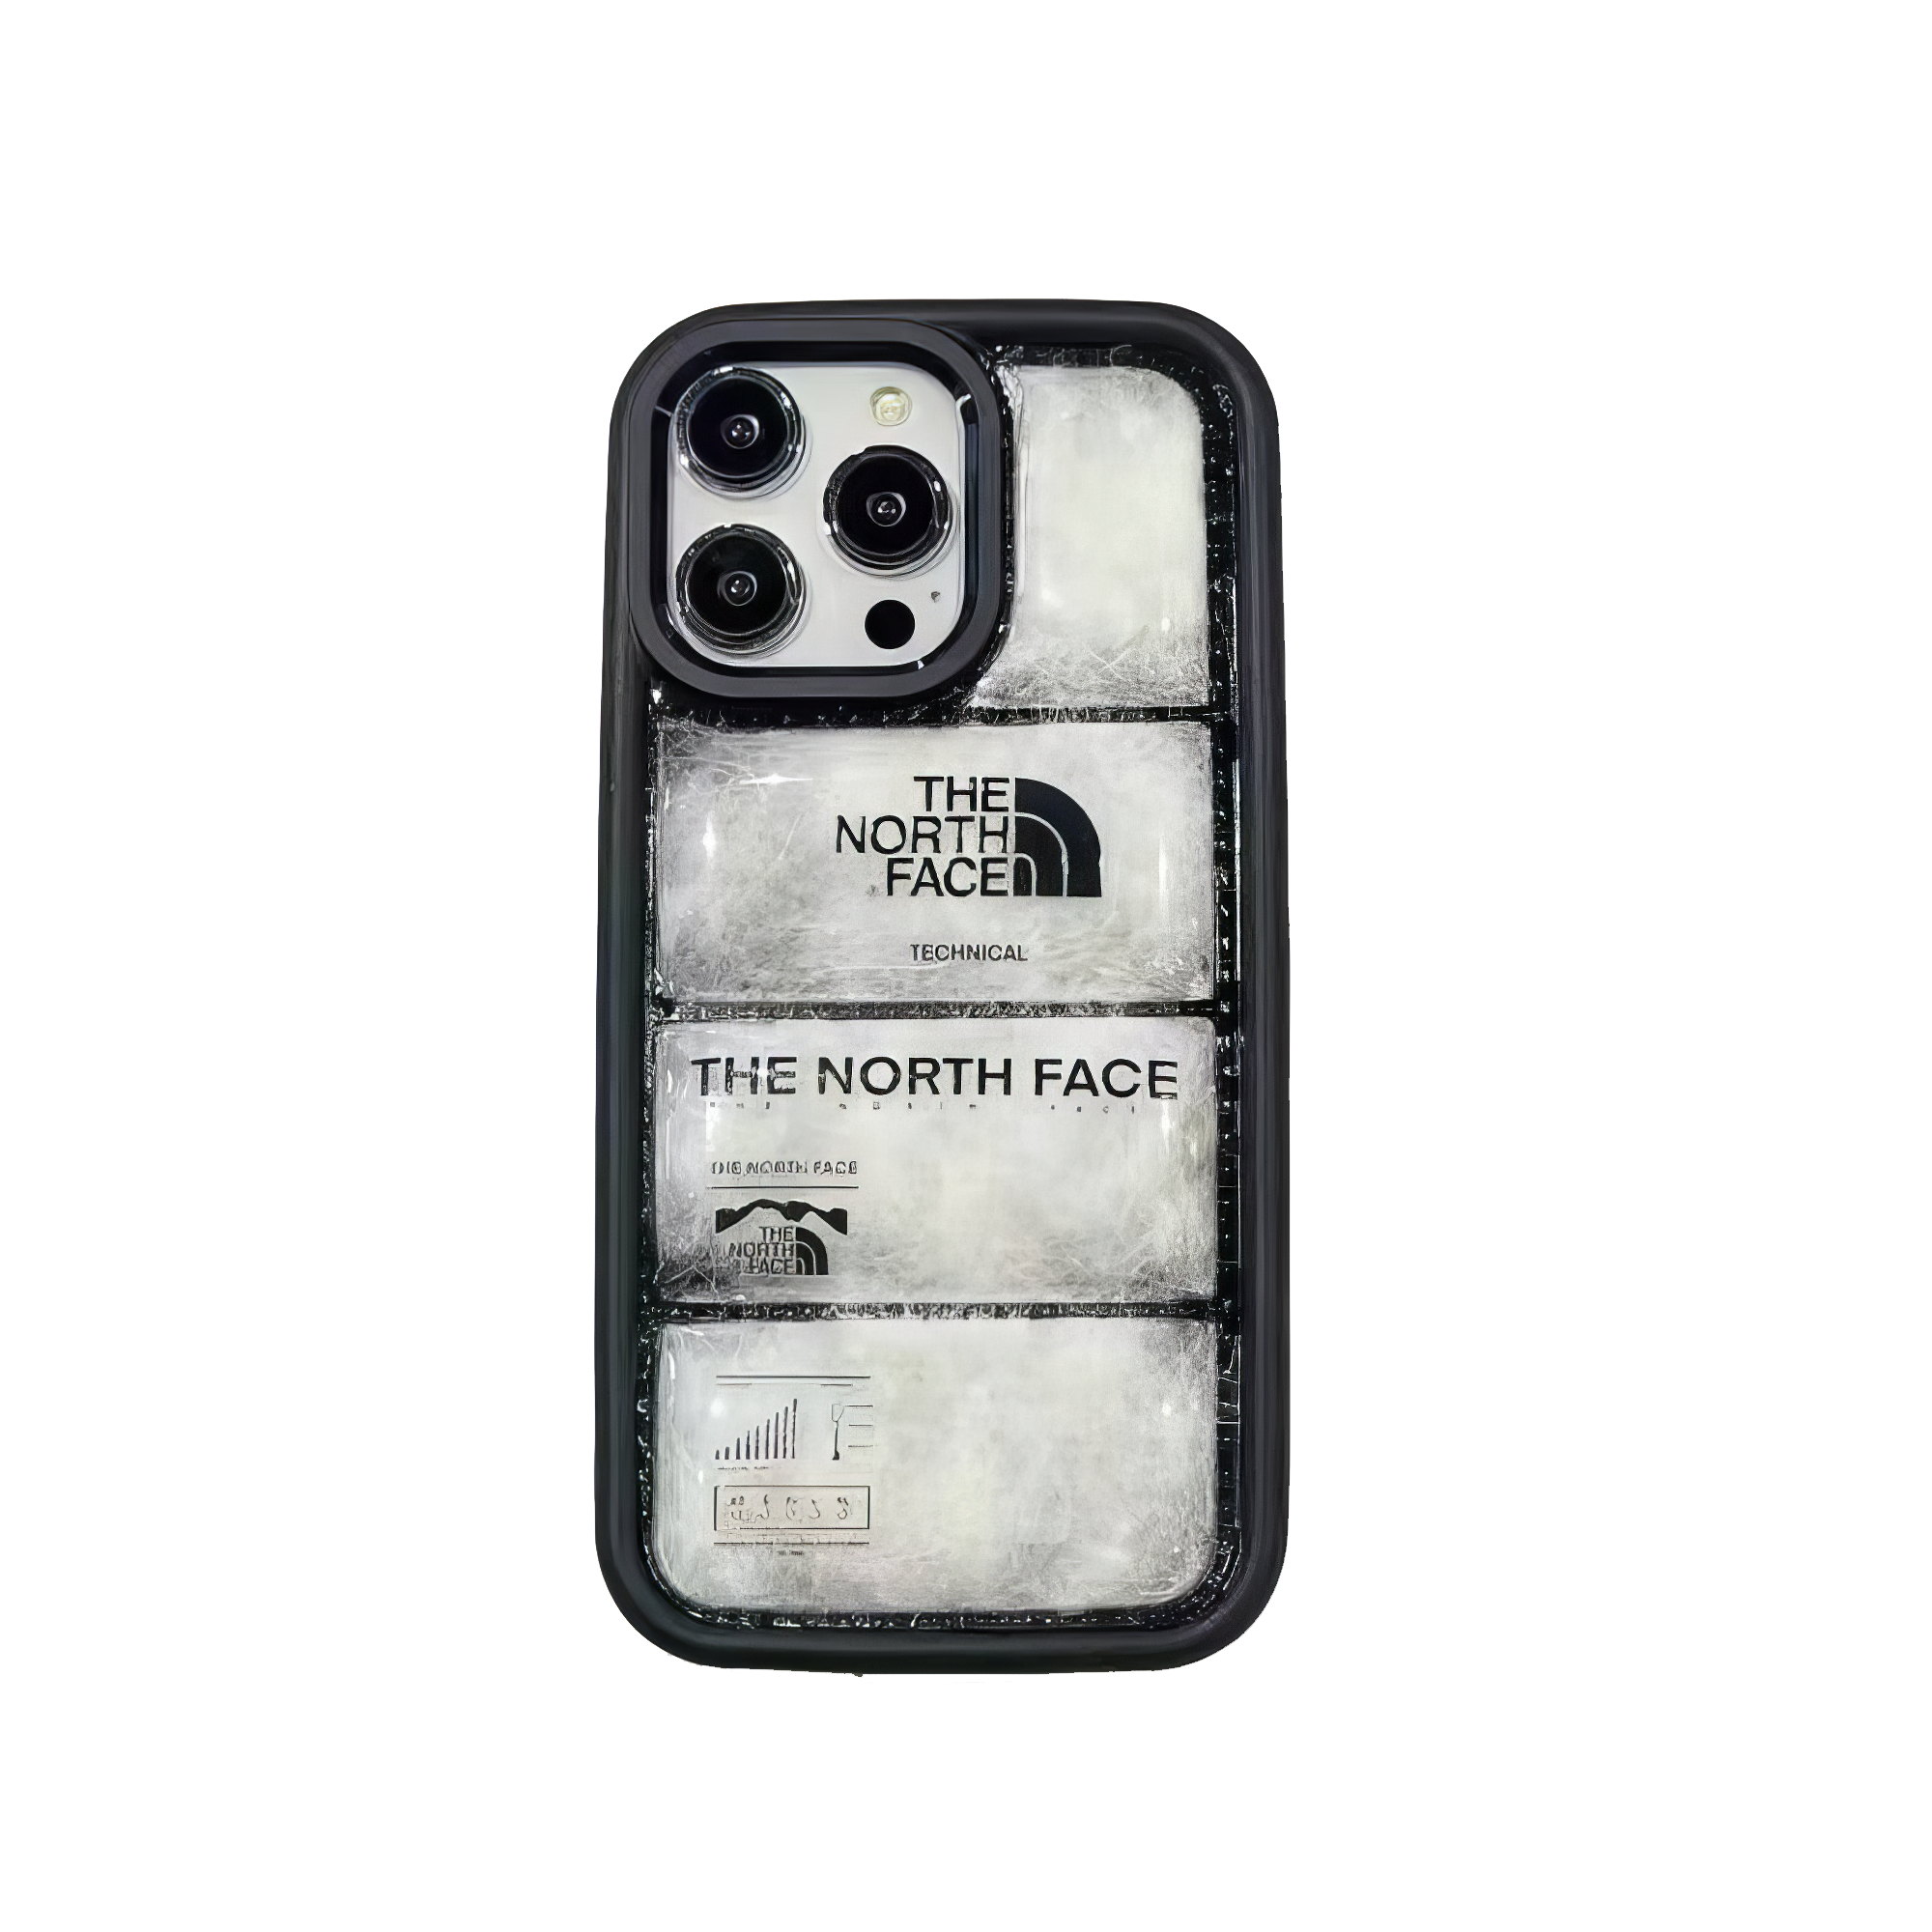 The North Face transparent technical smartphone case displaying internal design details while protecting your iPhone.